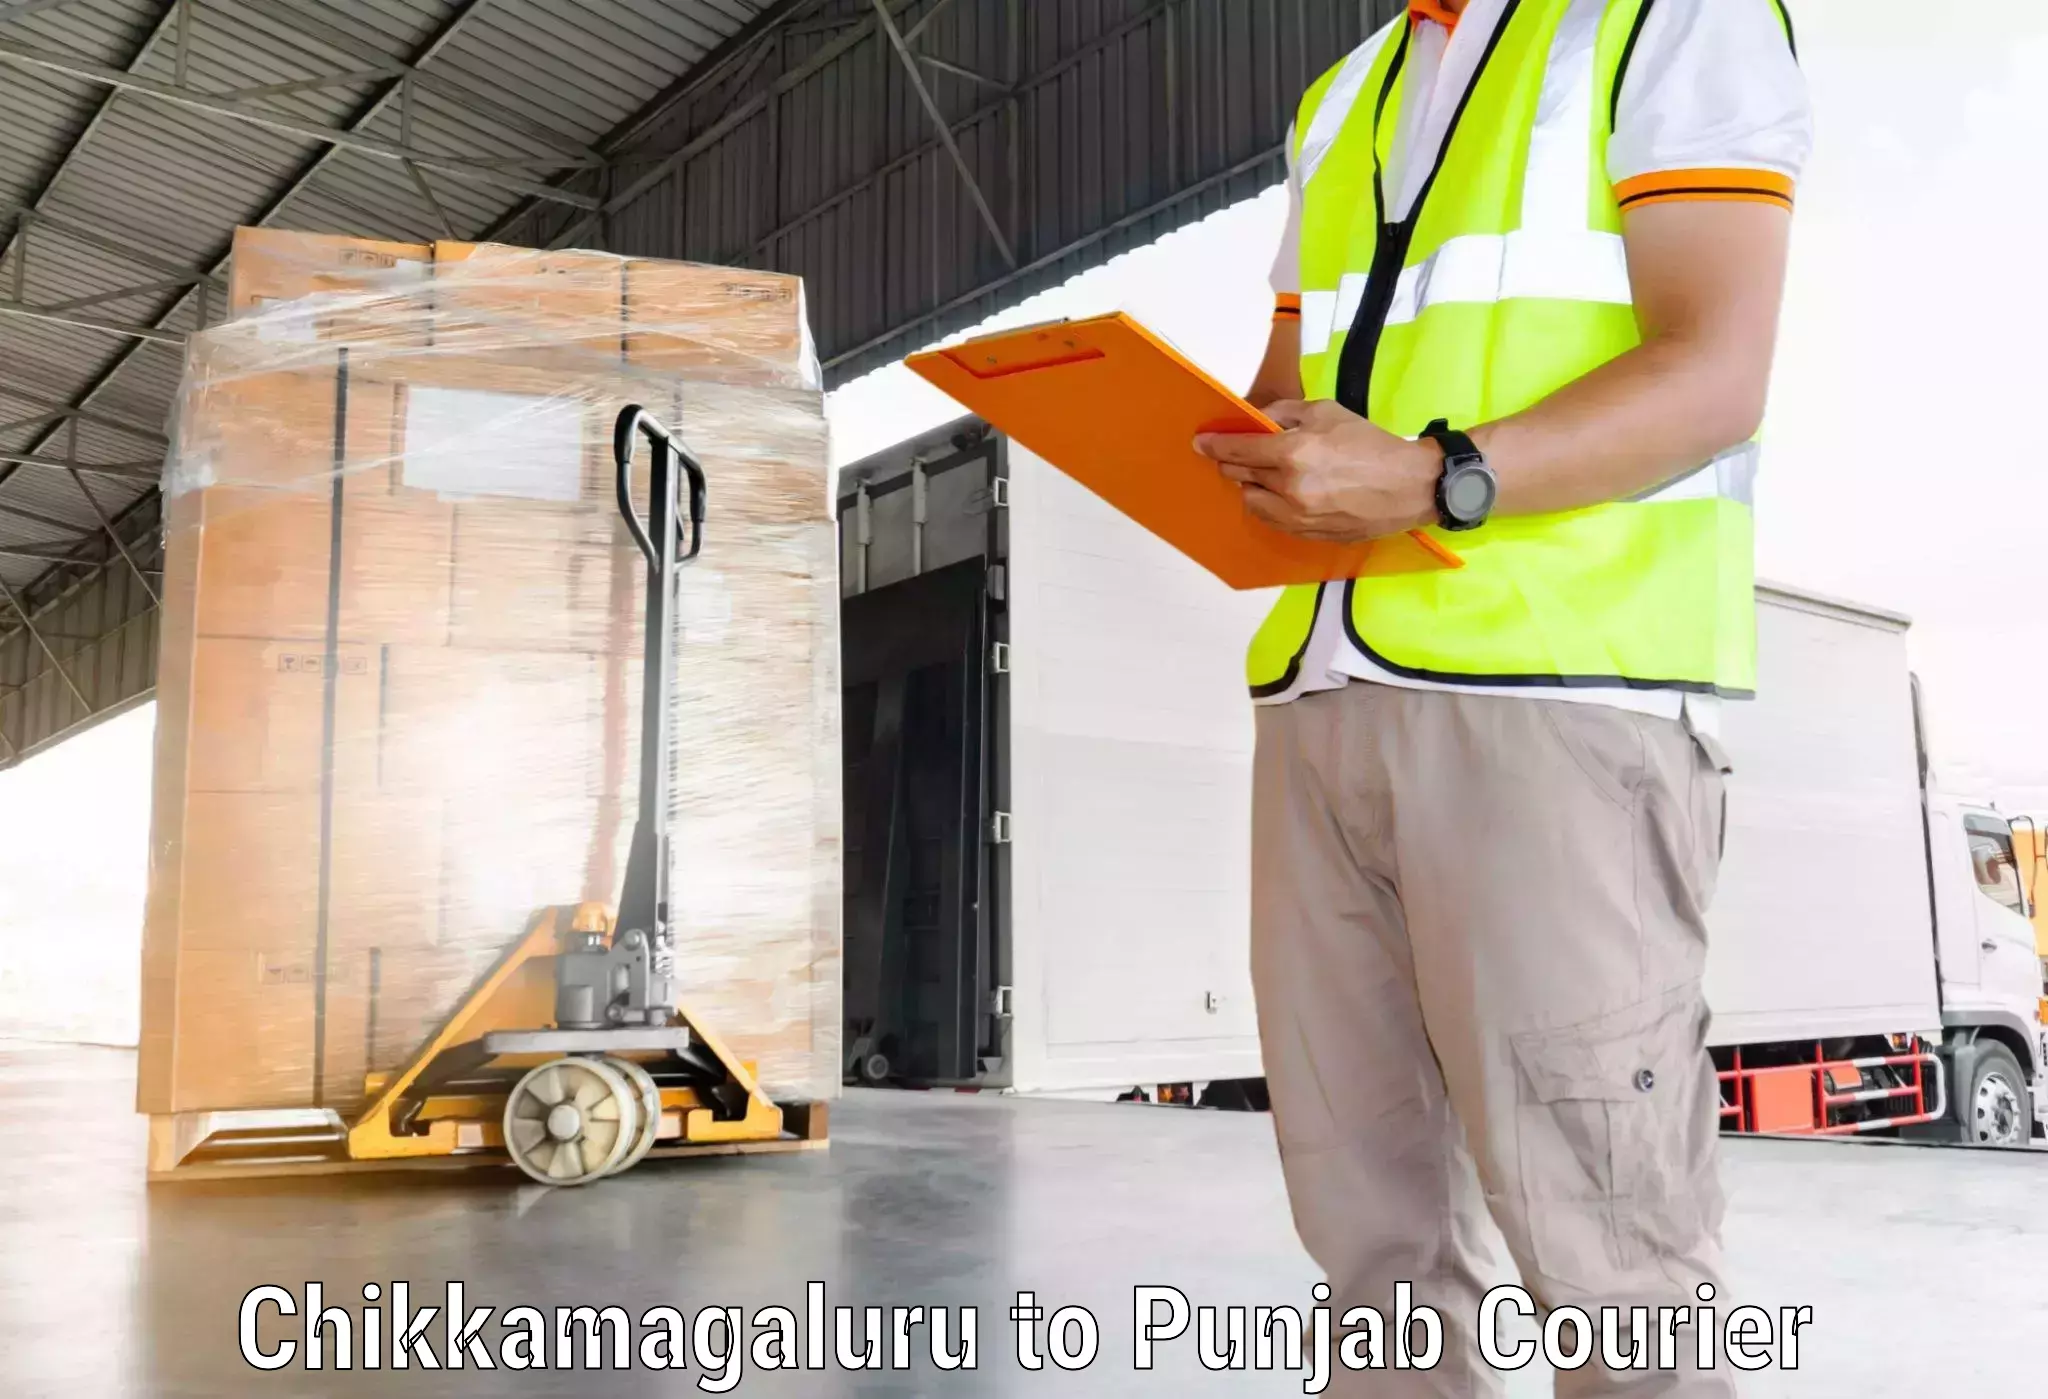 Express courier capabilities in Chikkamagaluru to Jalandhar